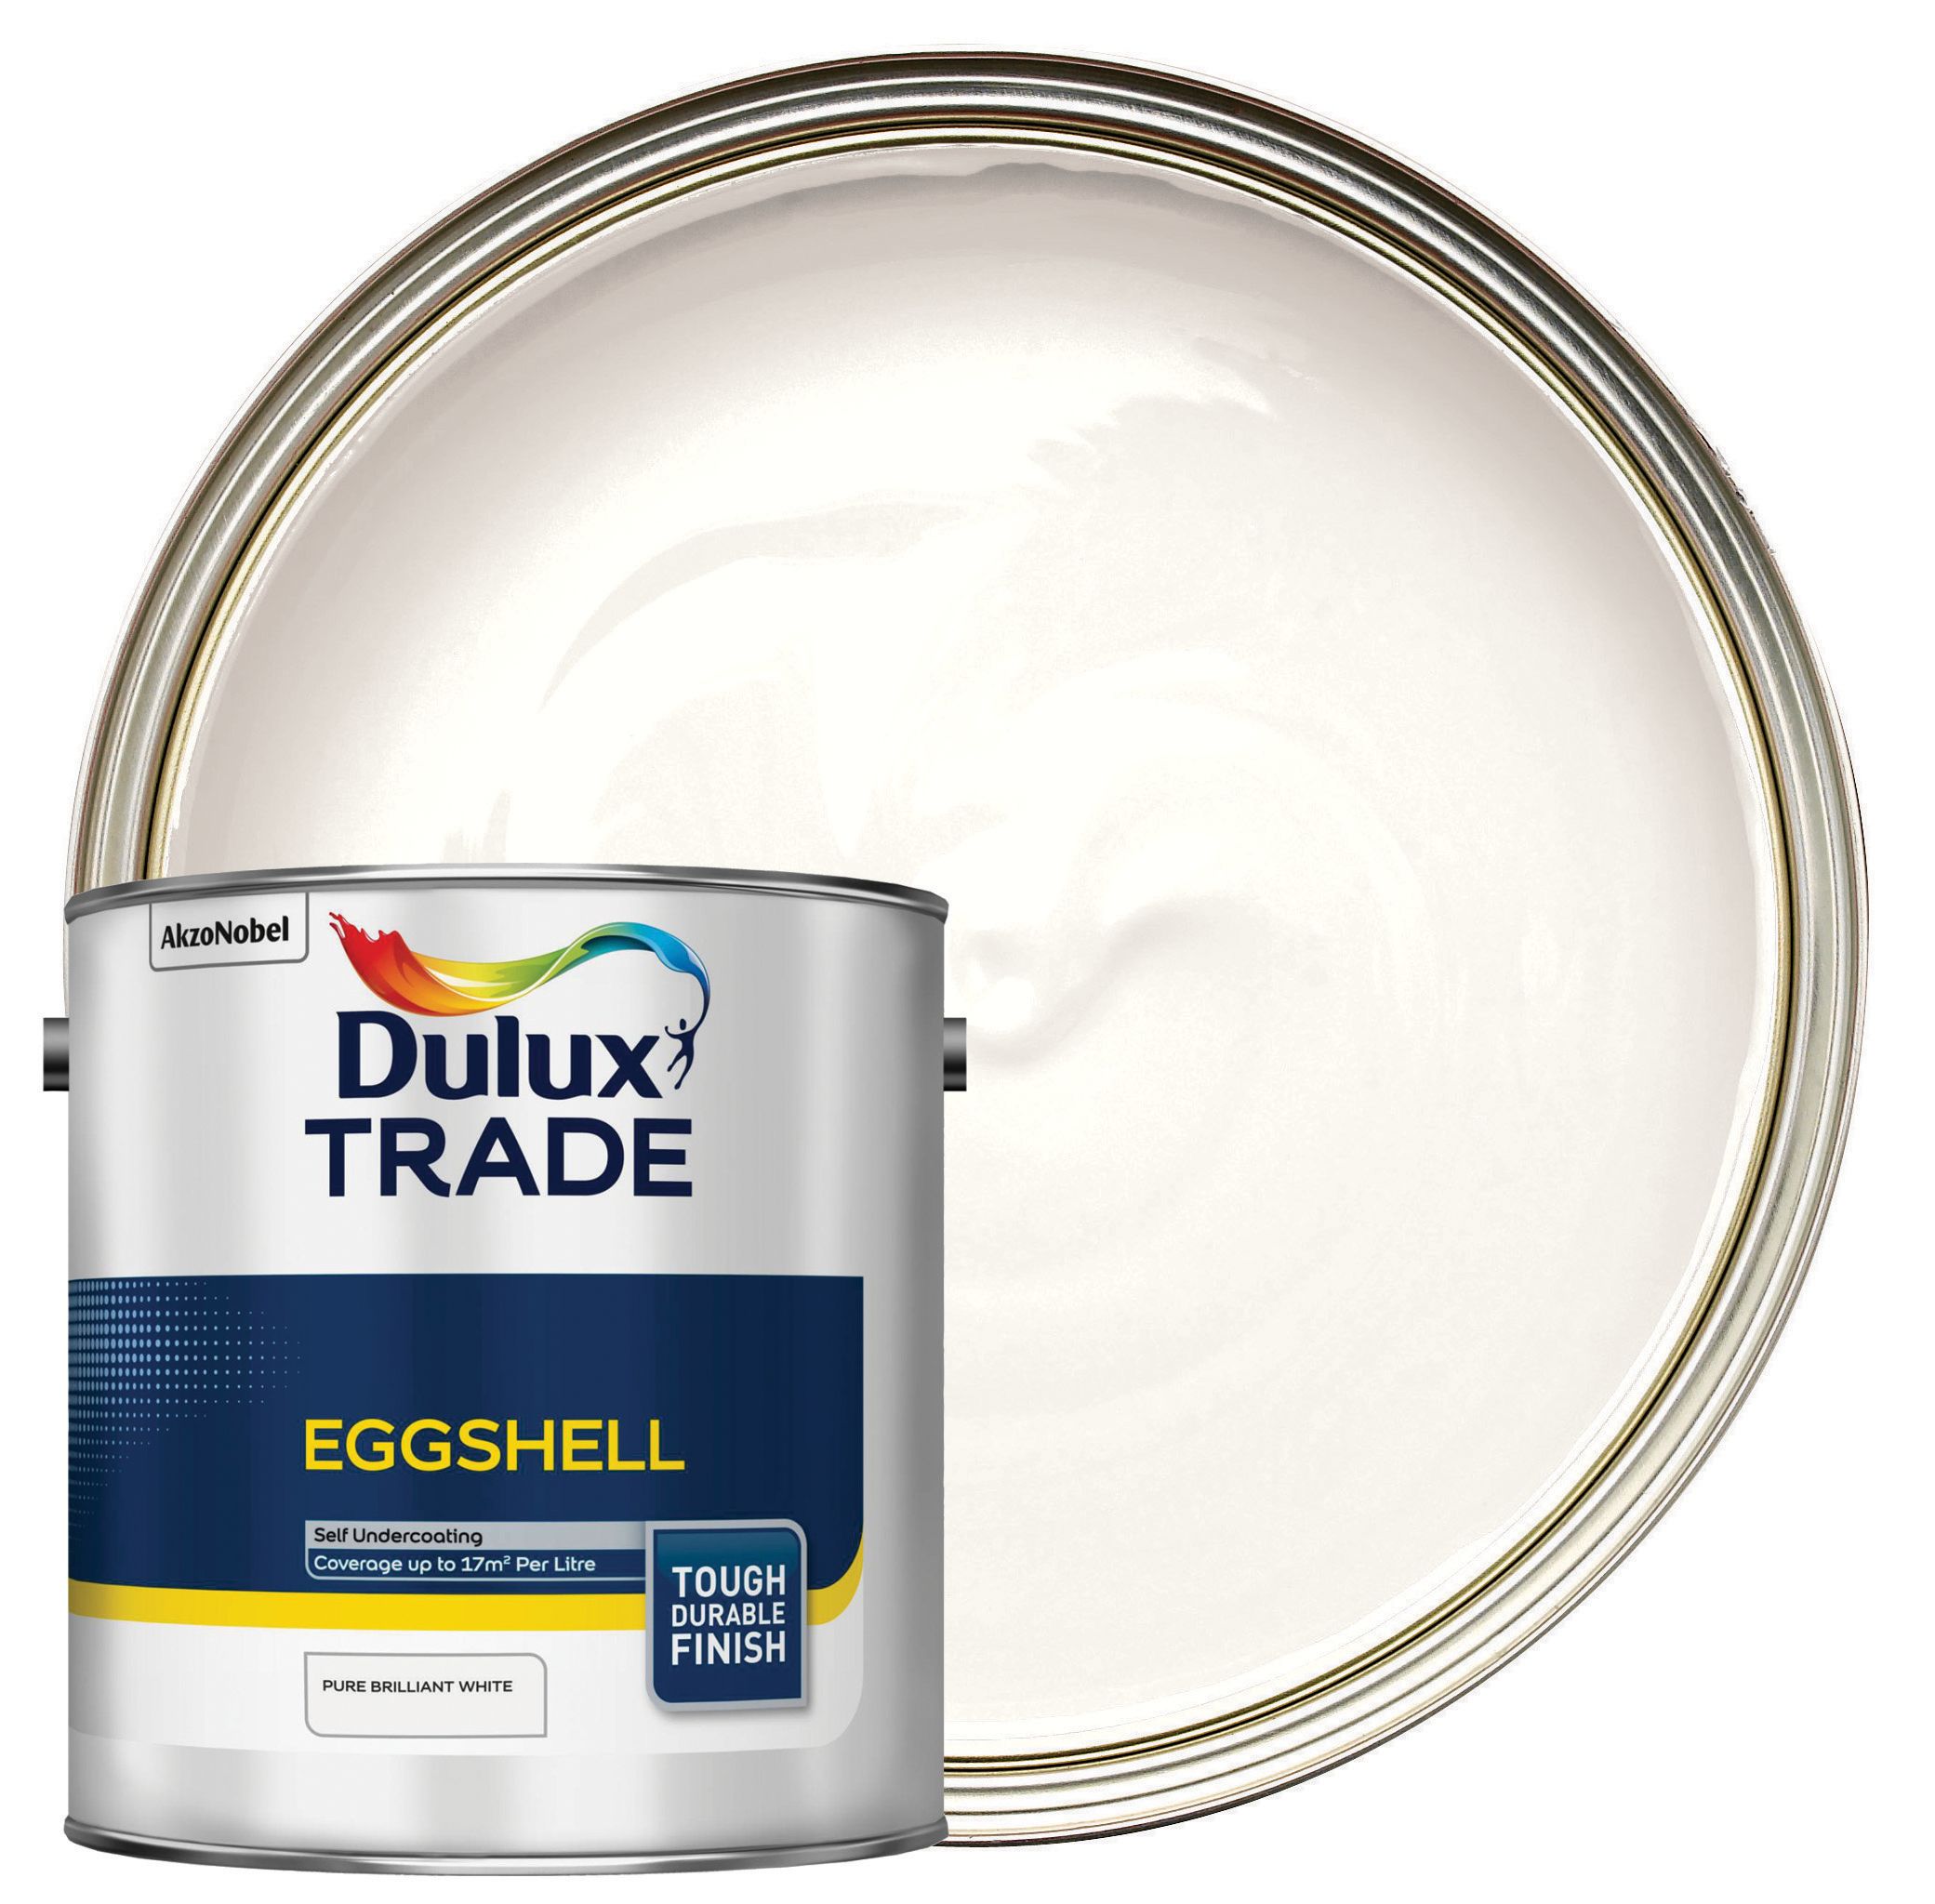 Image of Dulux Trade Eggshell Paint - Pure Brilliant White - 2.5L